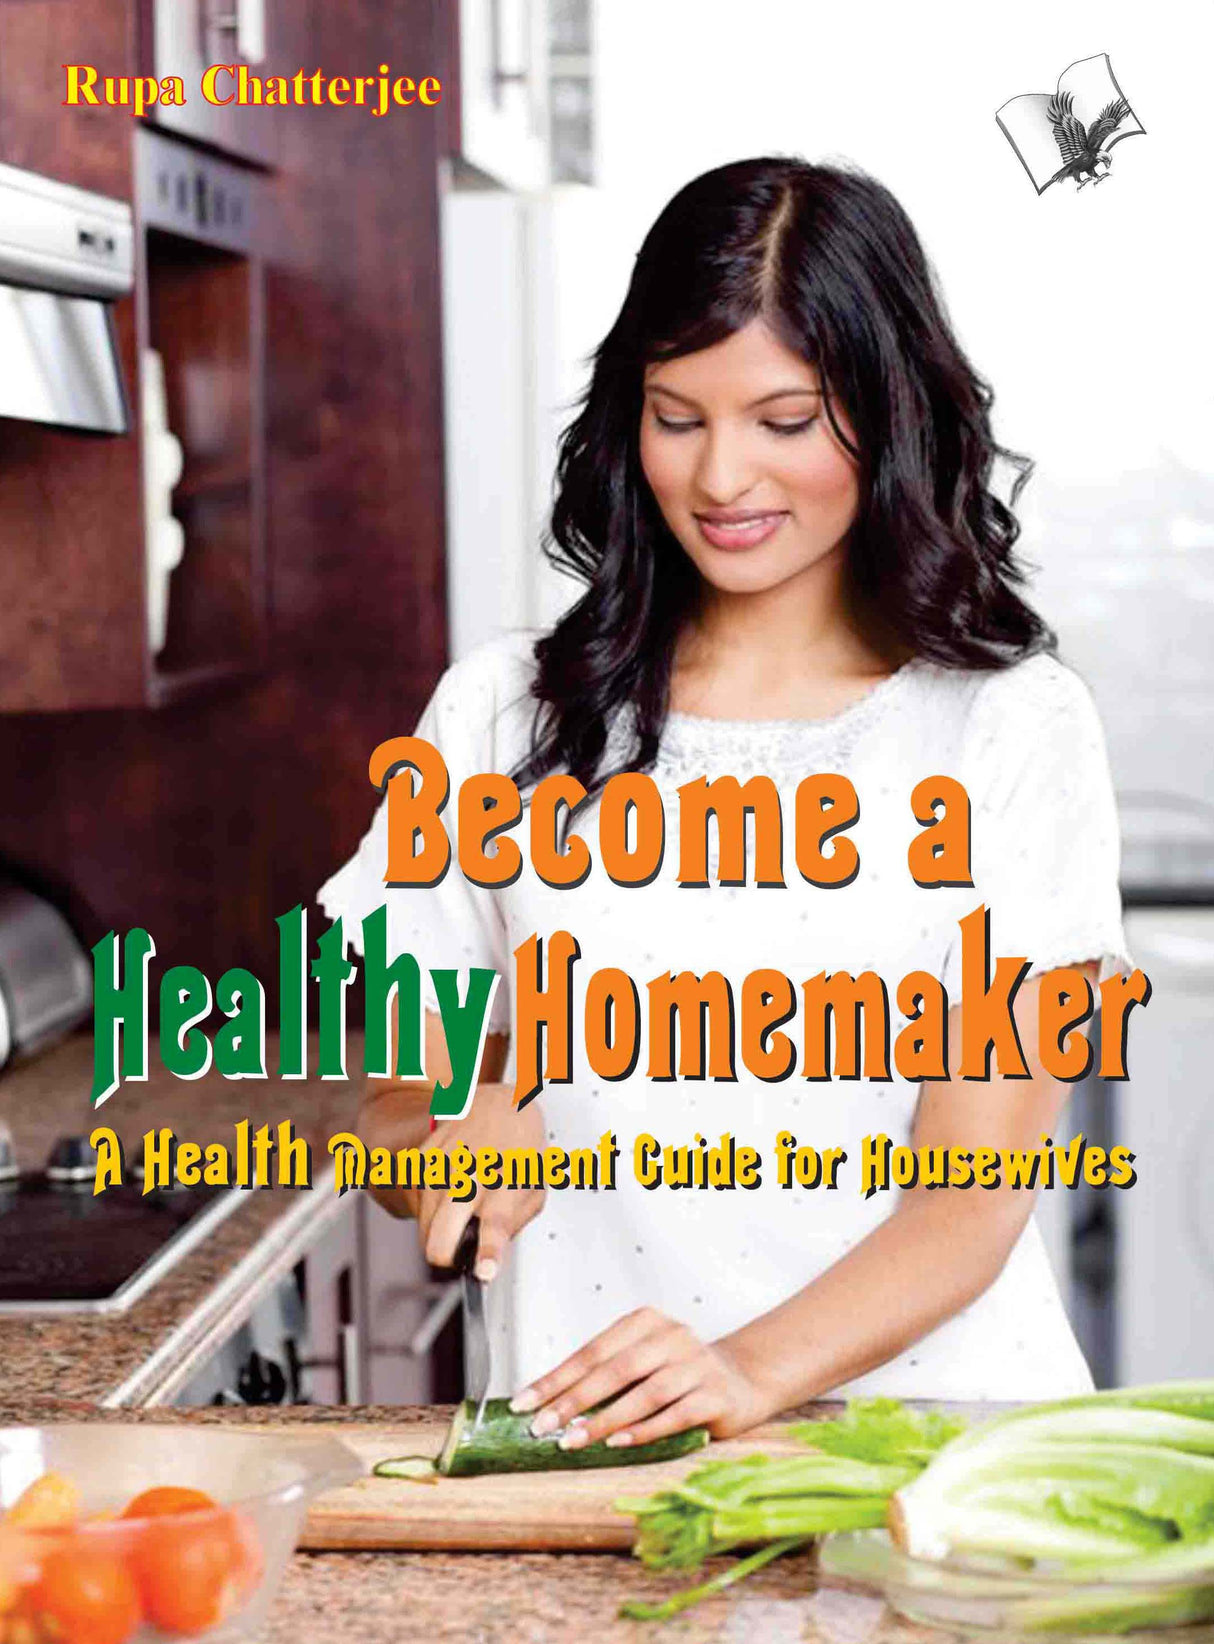 Become a Healthy Homemaker: Time saving tips to remain fit and healthy